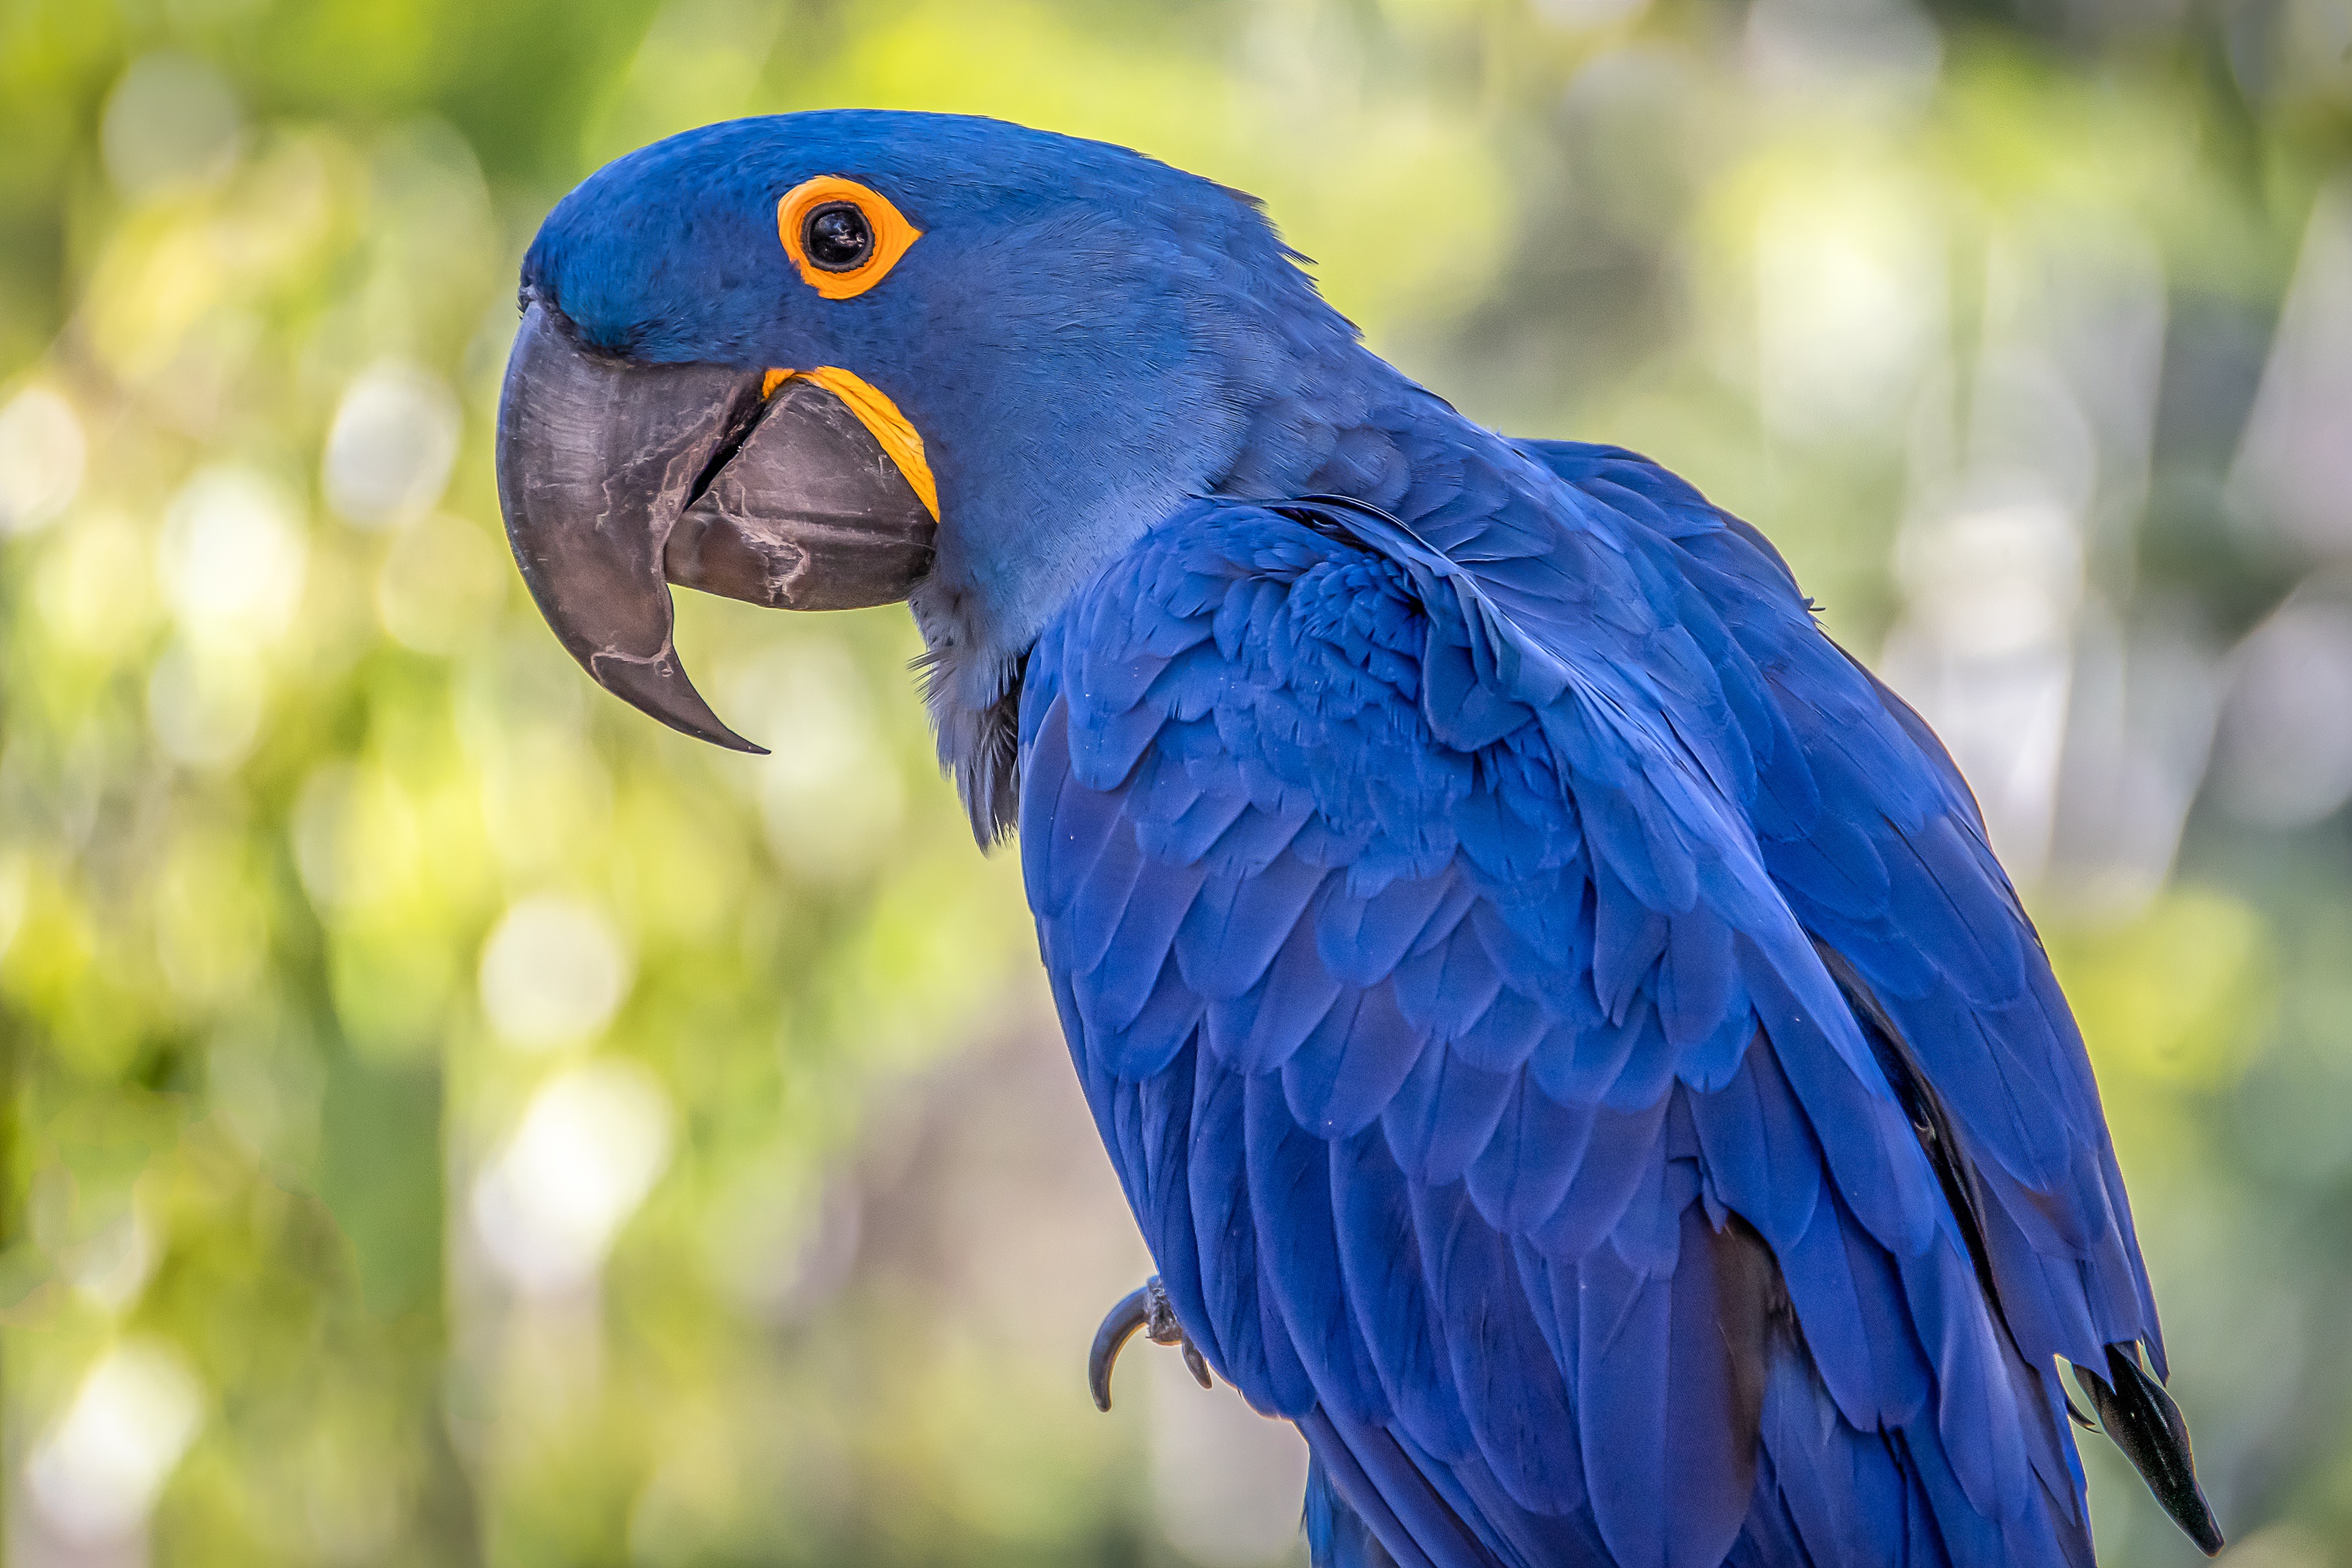 Spotting a hyacinth macaw in the wild